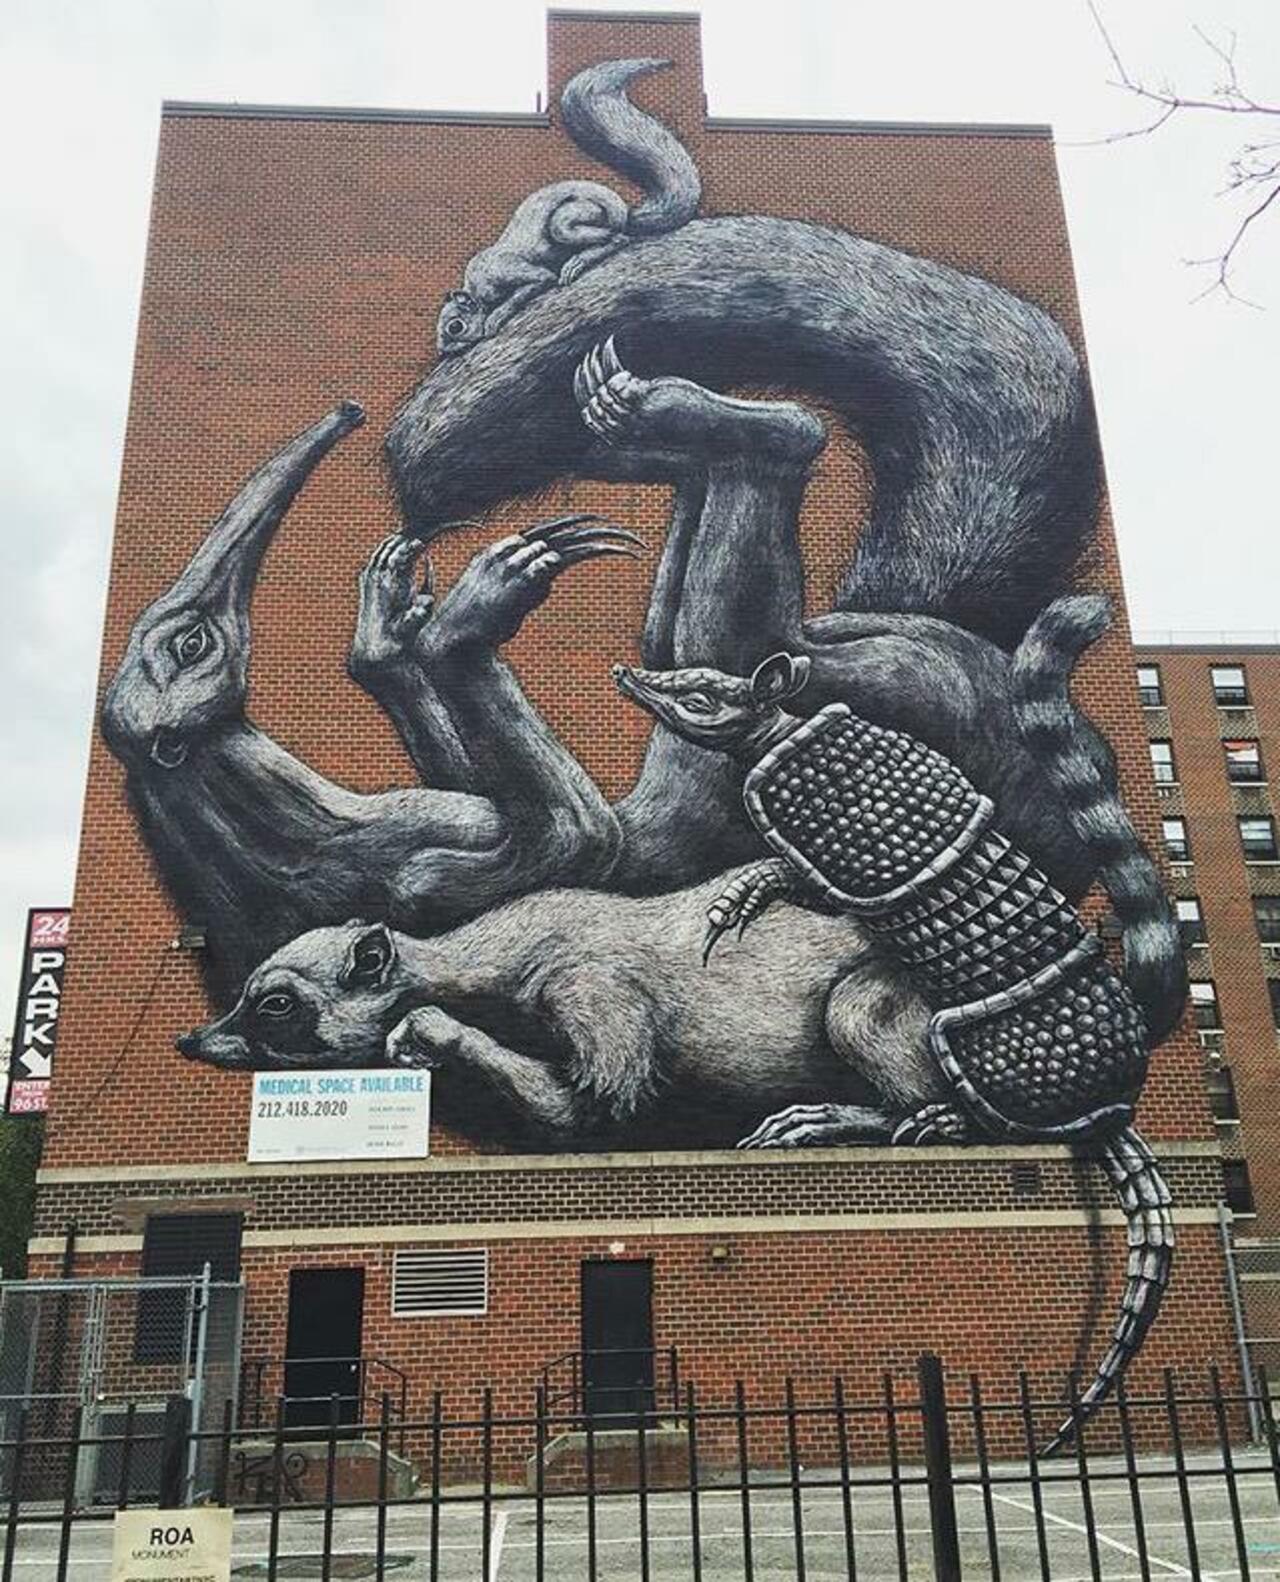 The completed new large scale Street Art wall by ROA in NYC

#art #graffiti #mural #streetart http://t.co/uS7wXLu9sz